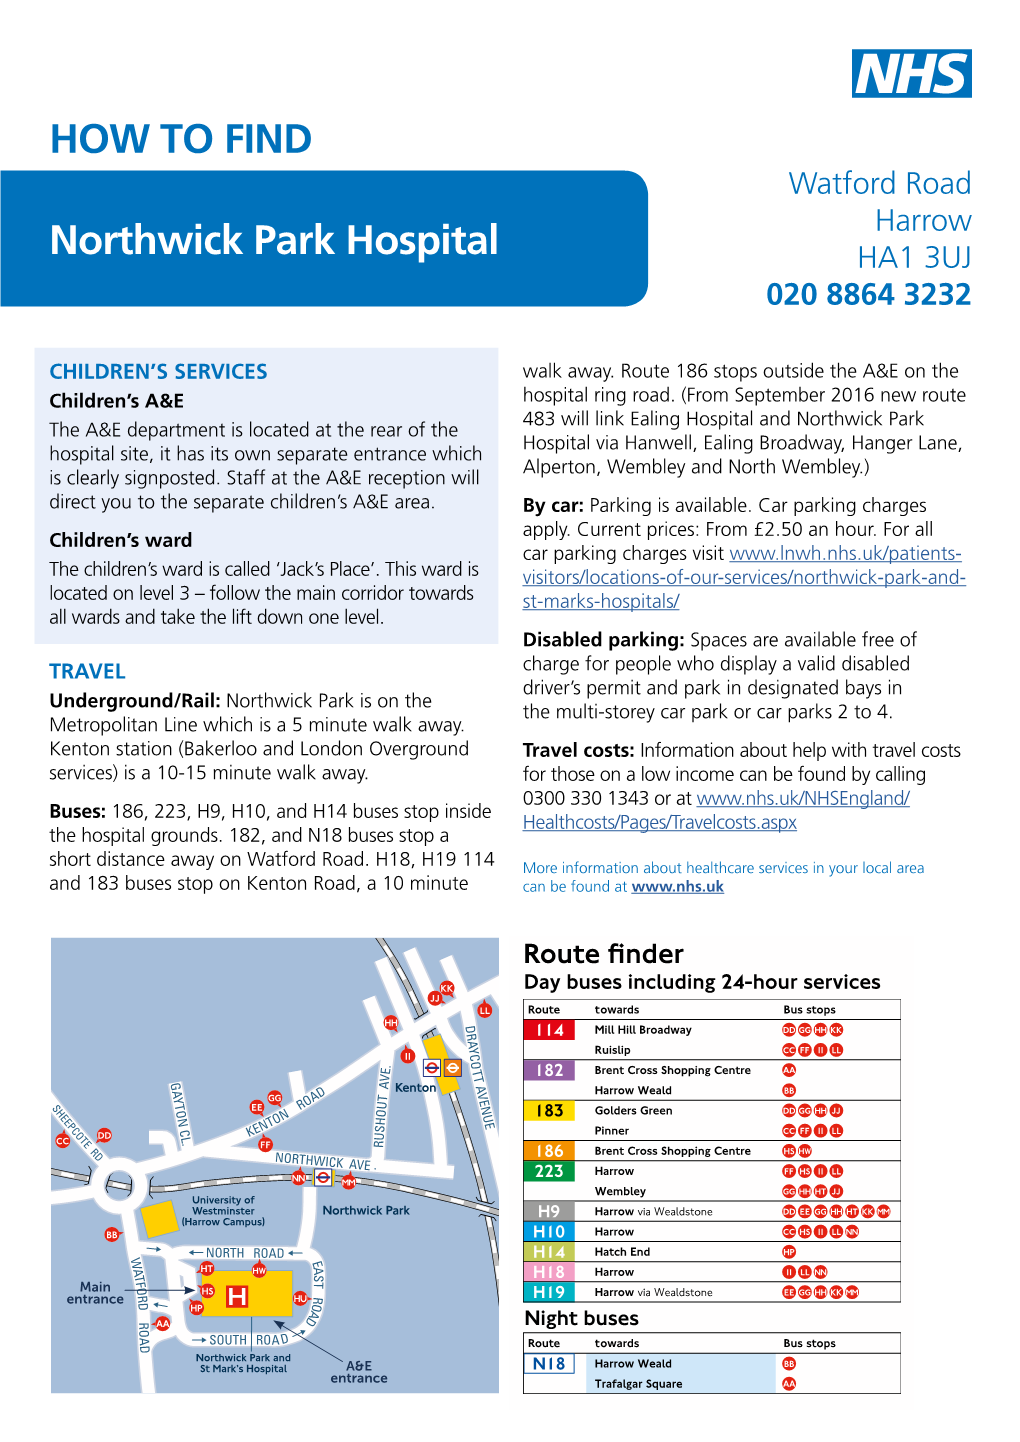 How to Find Northwick Park Hospital